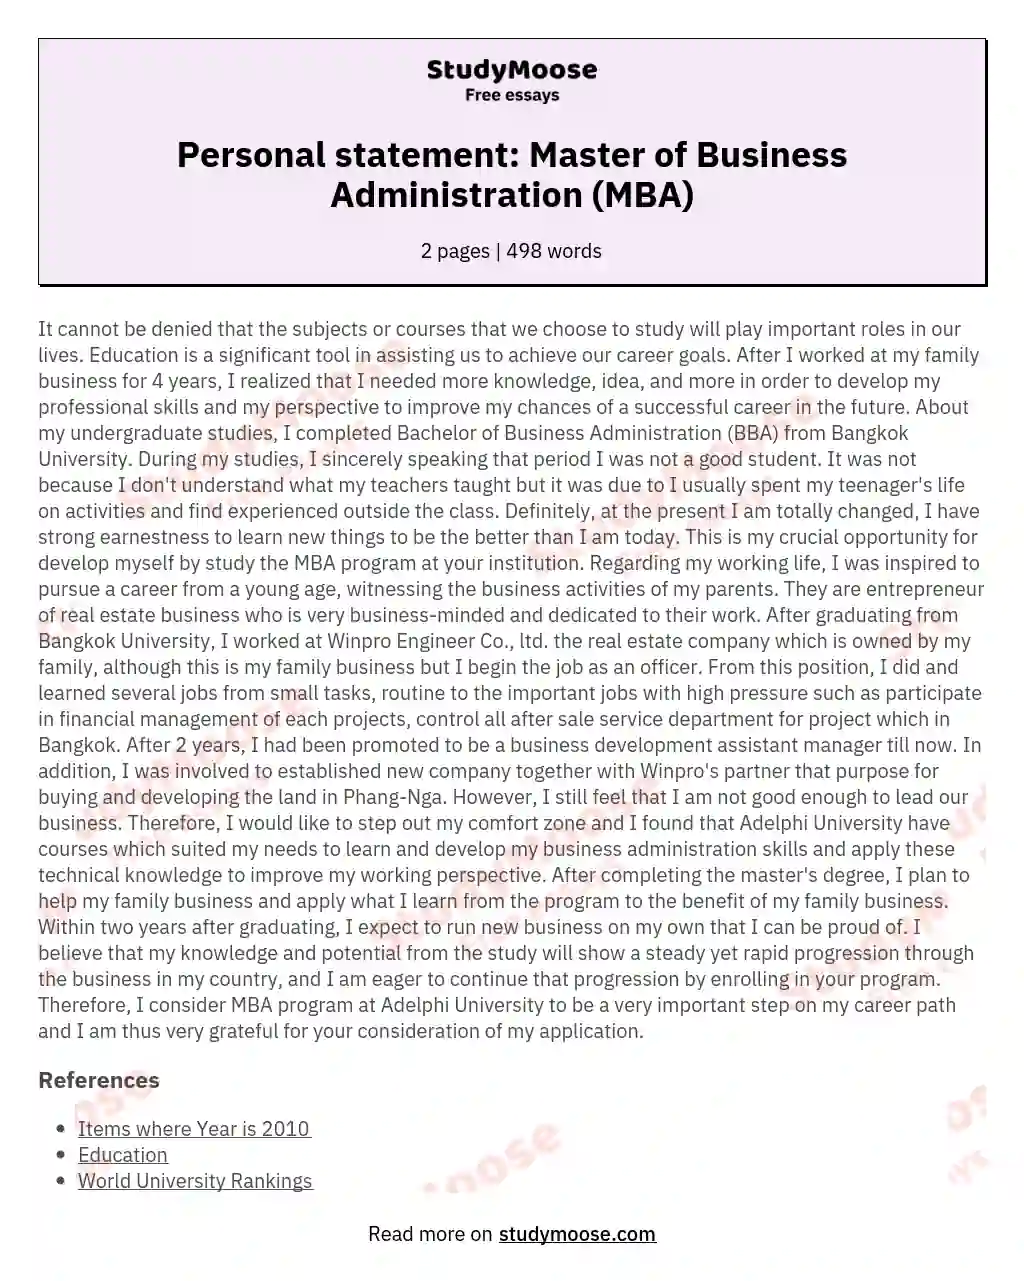 Personal statement: Master of Business Administration (MBA)